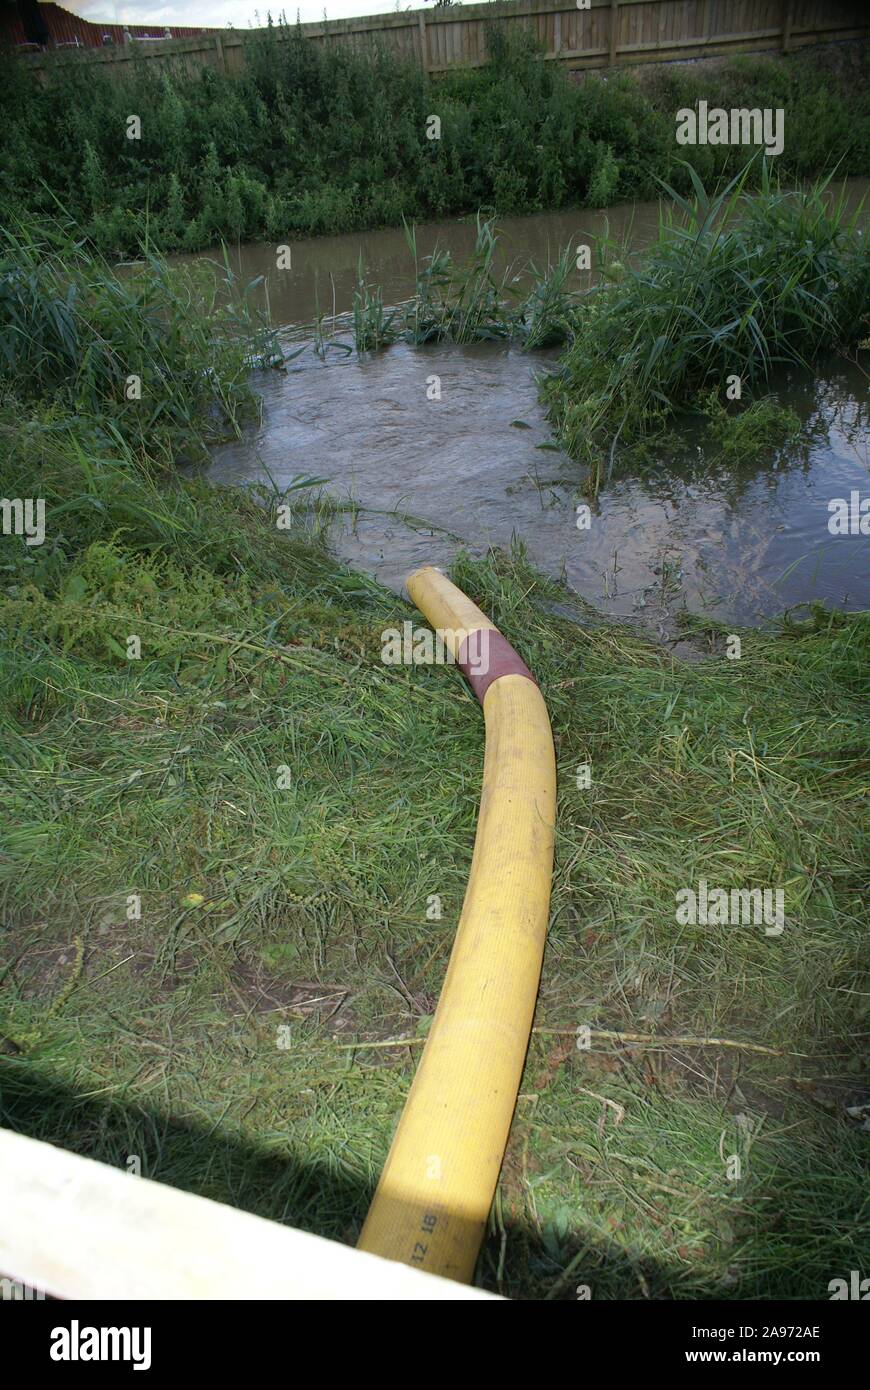 flood disaster zone, water pumping equipment Stock Photo